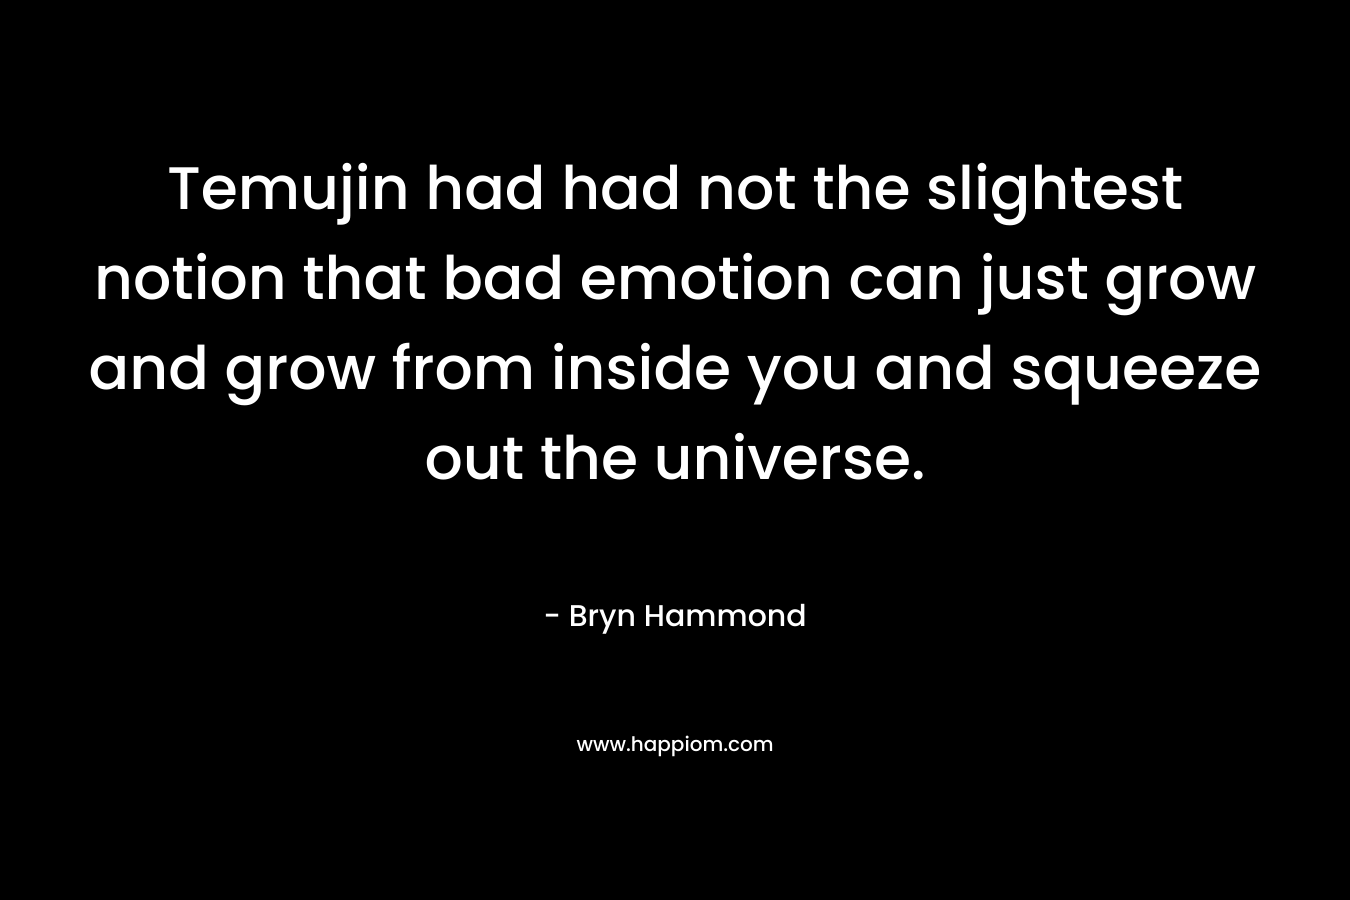 Temujin had had not the slightest notion that bad emotion can just grow and grow from inside you and squeeze out the universe. – Bryn  Hammond